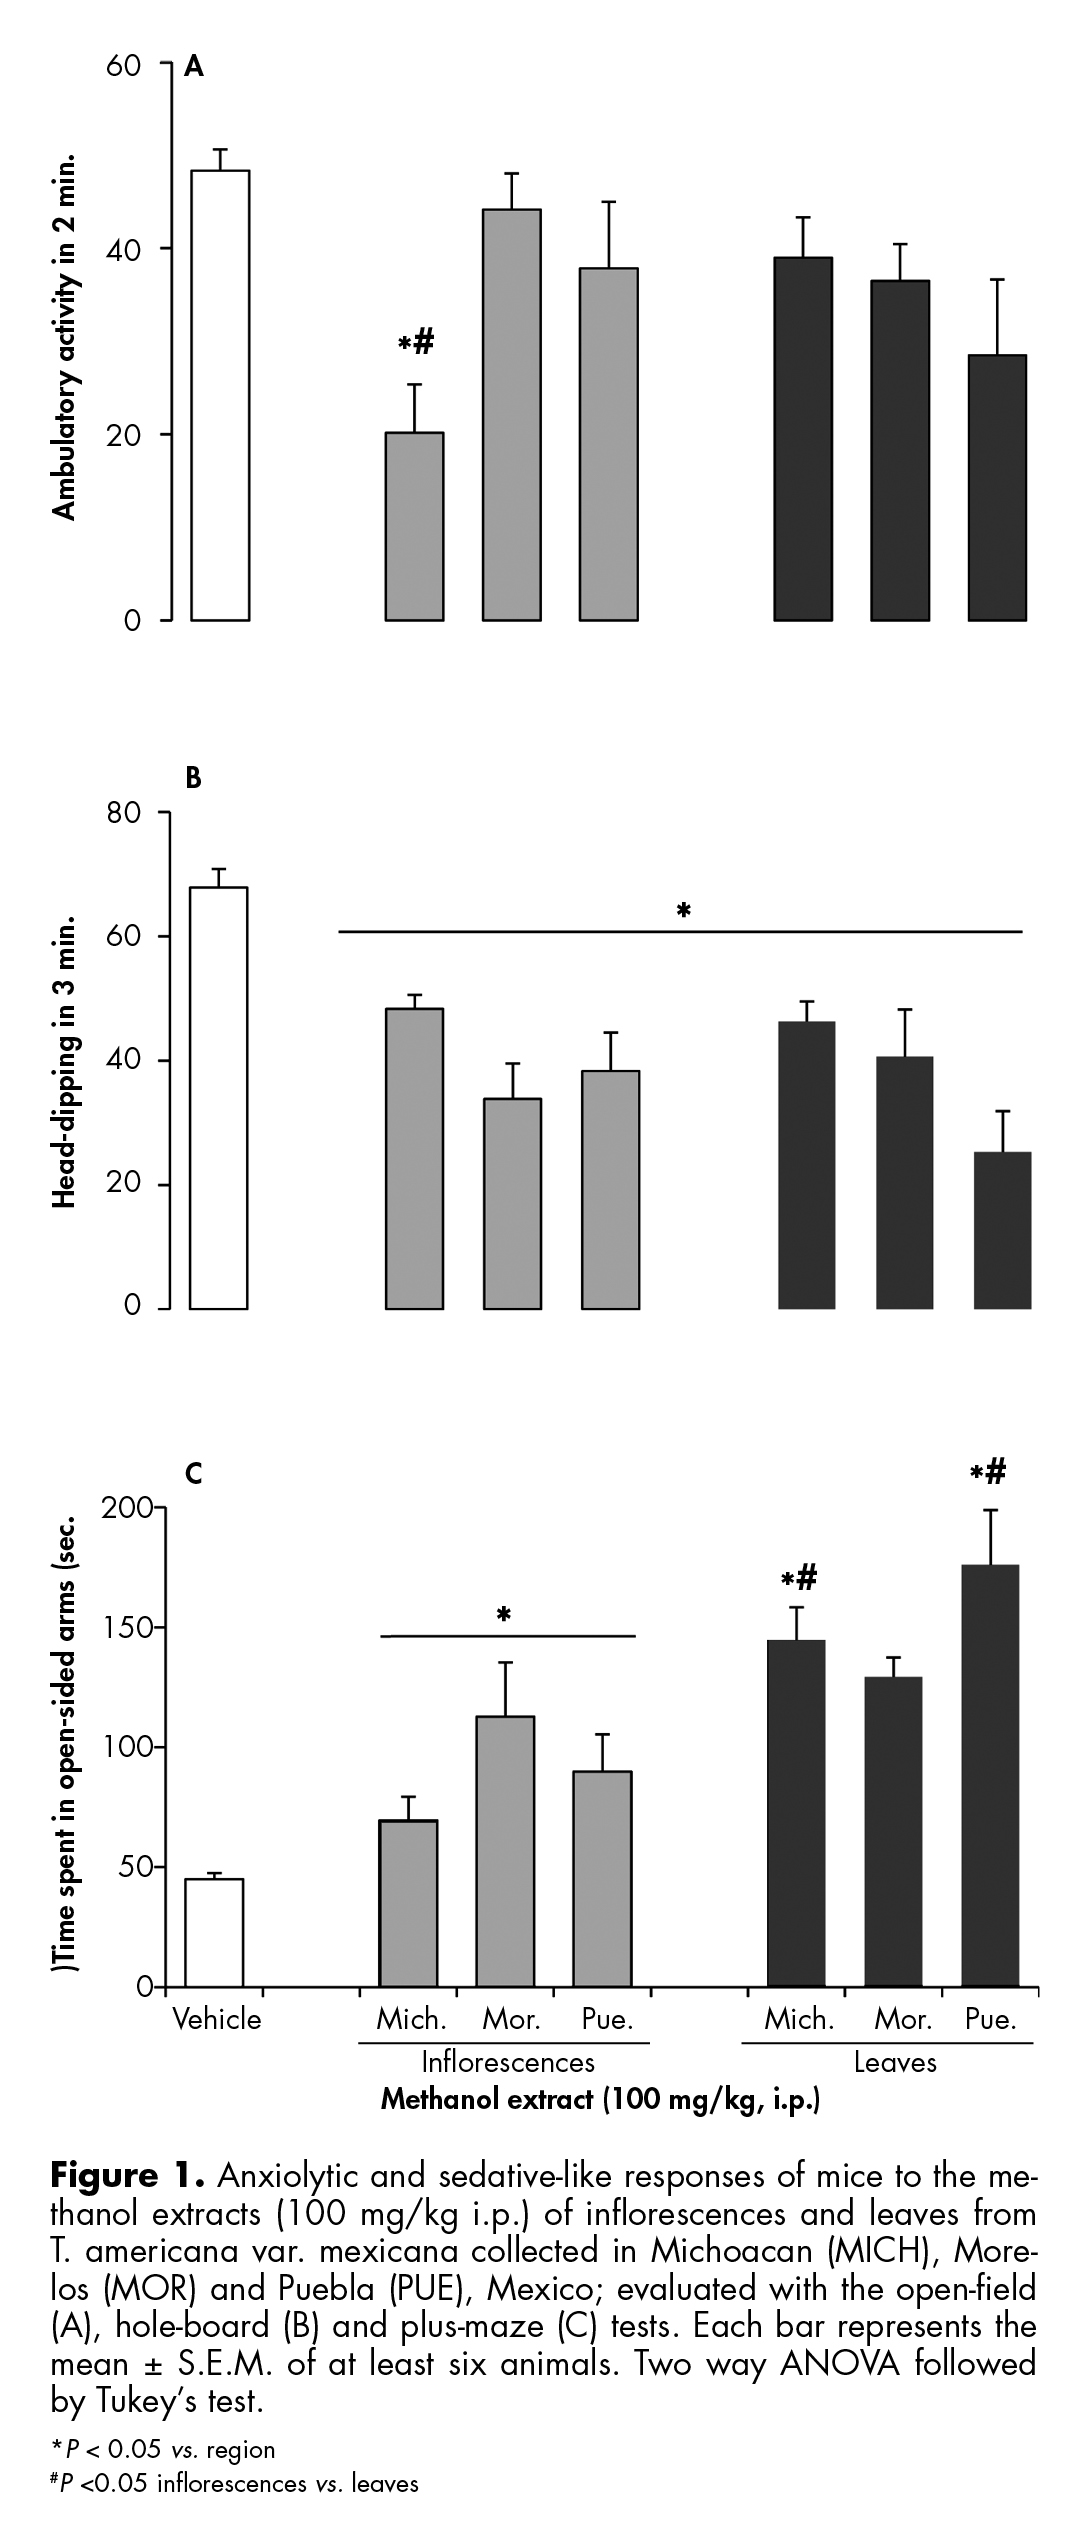 Anxiolytic and sedative-like responses of mice to the methanol extracts (100 mg/kg i.p.) of inflorescences and leaves from T. americana var. mexicana.